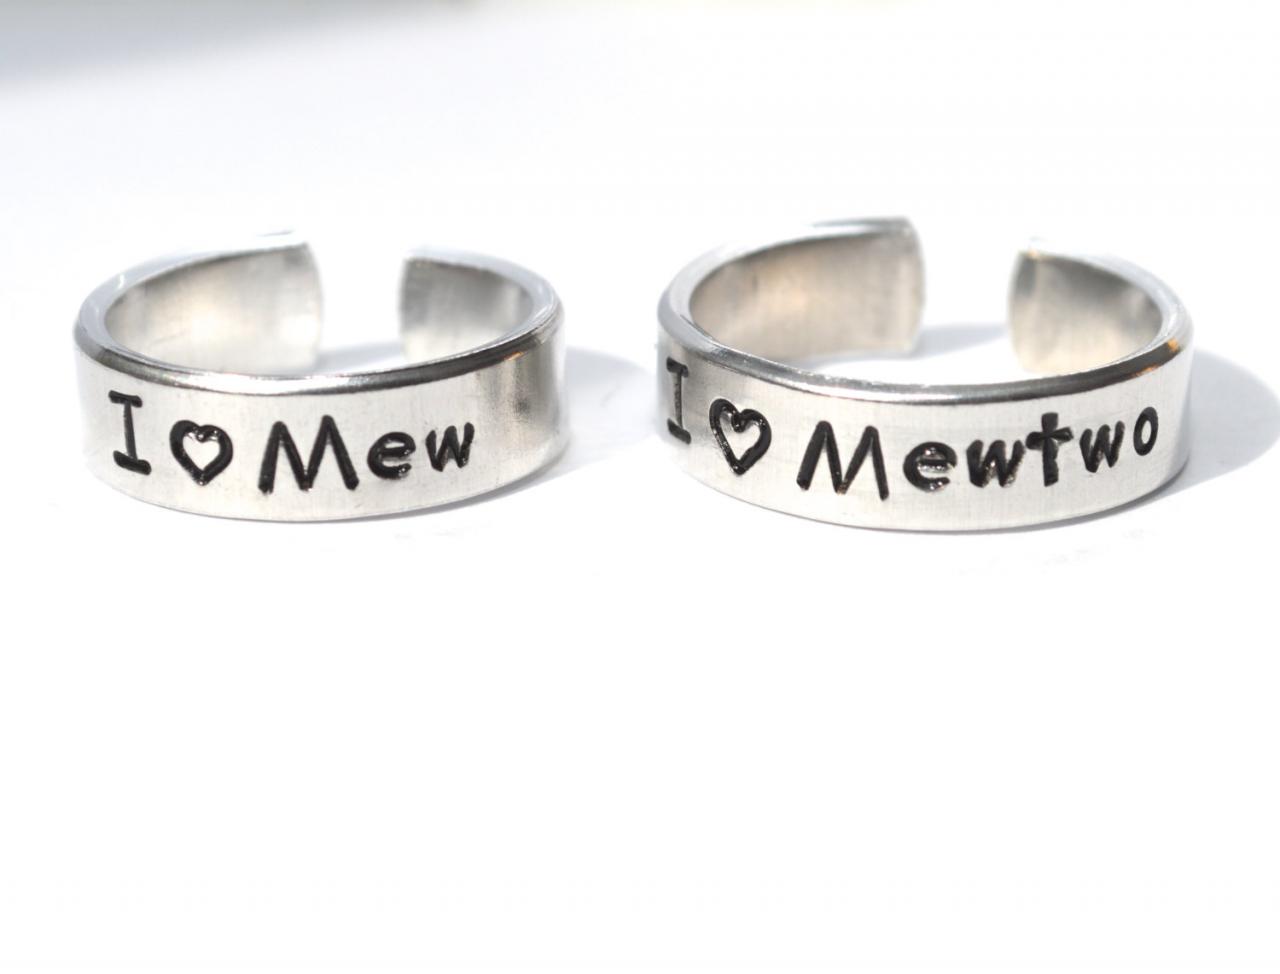 I Heart Mew And Mew Two Adjustable Aluminum Metal Stamped Ring Pair Ready To Ship .